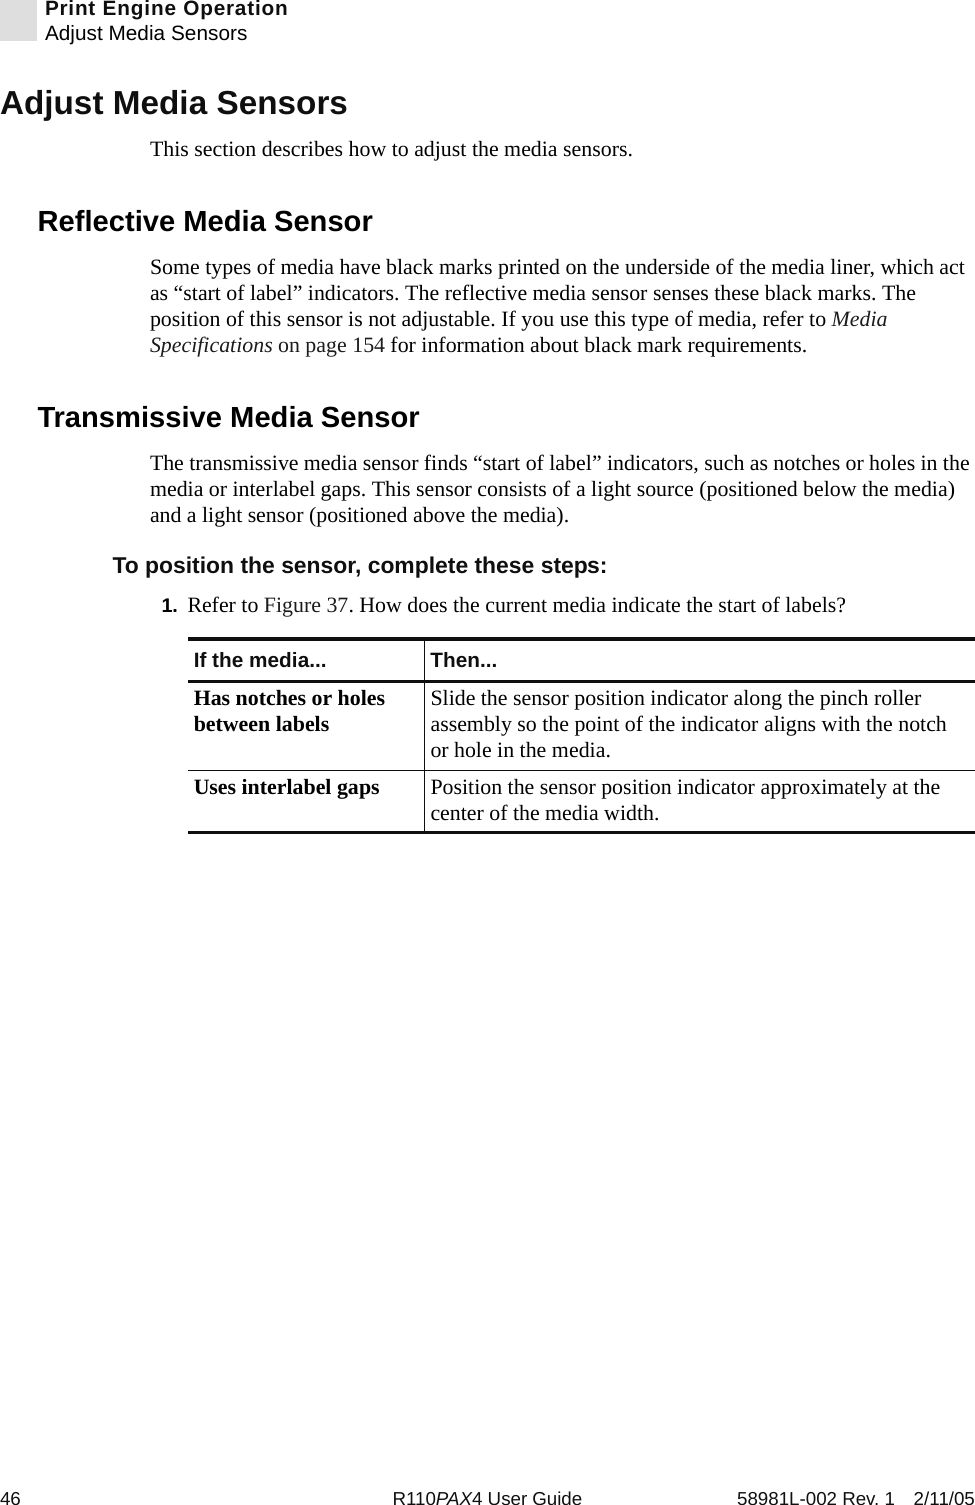 46 R110PAX4 User Guide 58981L-002 Rev. 1 2/11/05Print Engine OperationAdjust Media SensorsAdjust Media SensorsThis section describes how to adjust the media sensors.Reflective Media SensorSome types of media have black marks printed on the underside of the media liner, which act as “start of label” indicators. The reflective media sensor senses these black marks. The position of this sensor is not adjustable. If you use this type of media, refer to Media Specifications on page 154 for information about black mark requirements.Transmissive Media SensorThe transmissive media sensor finds “start of label” indicators, such as notches or holes in the media or interlabel gaps. This sensor consists of a light source (positioned below the media) and a light sensor (positioned above the media). To position the sensor, complete these steps:1. Refer to Figure 37. How does the current media indicate the start of labels?If the media... Then...Has notches or holes between labels Slide the sensor position indicator along the pinch roller assembly so the point of the indicator aligns with the notch or hole in the media. Uses interlabel gaps Position the sensor position indicator approximately at the center of the media width.